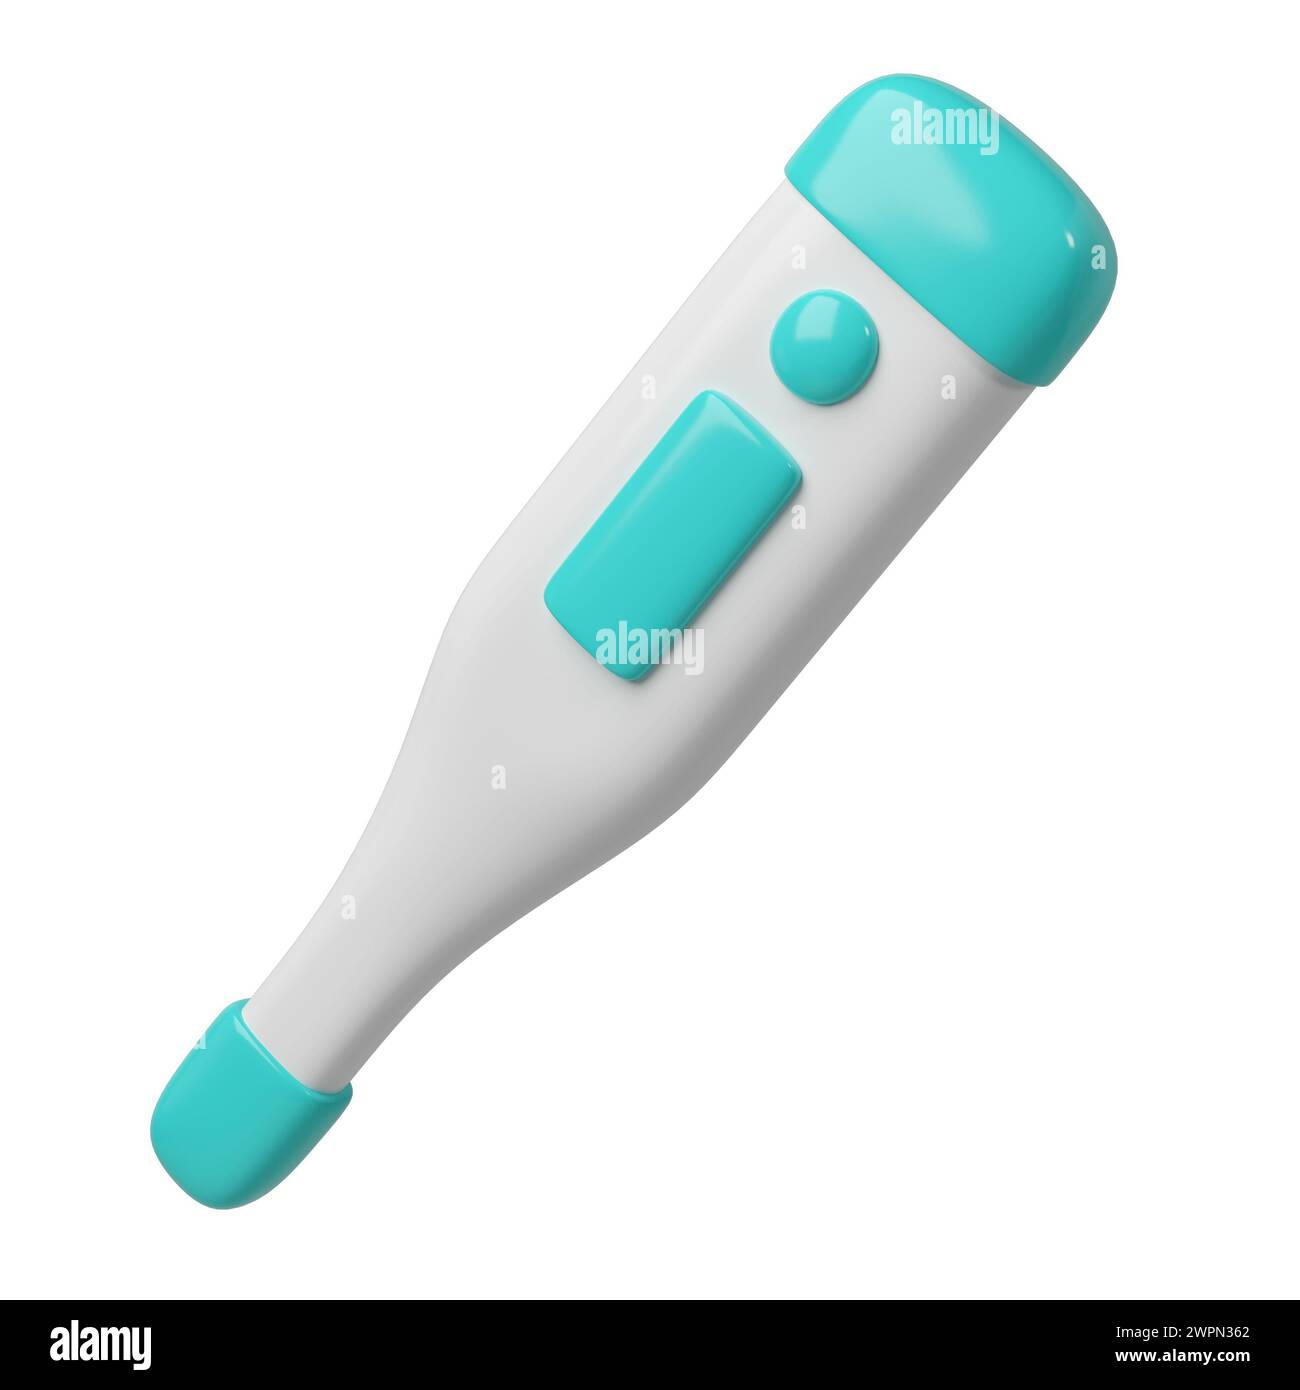 3d medical electronic thermometer icon. Rendering illustration of medicine diagnostic instrument to temperature measurement in turquoise color. Cute Stock Photo